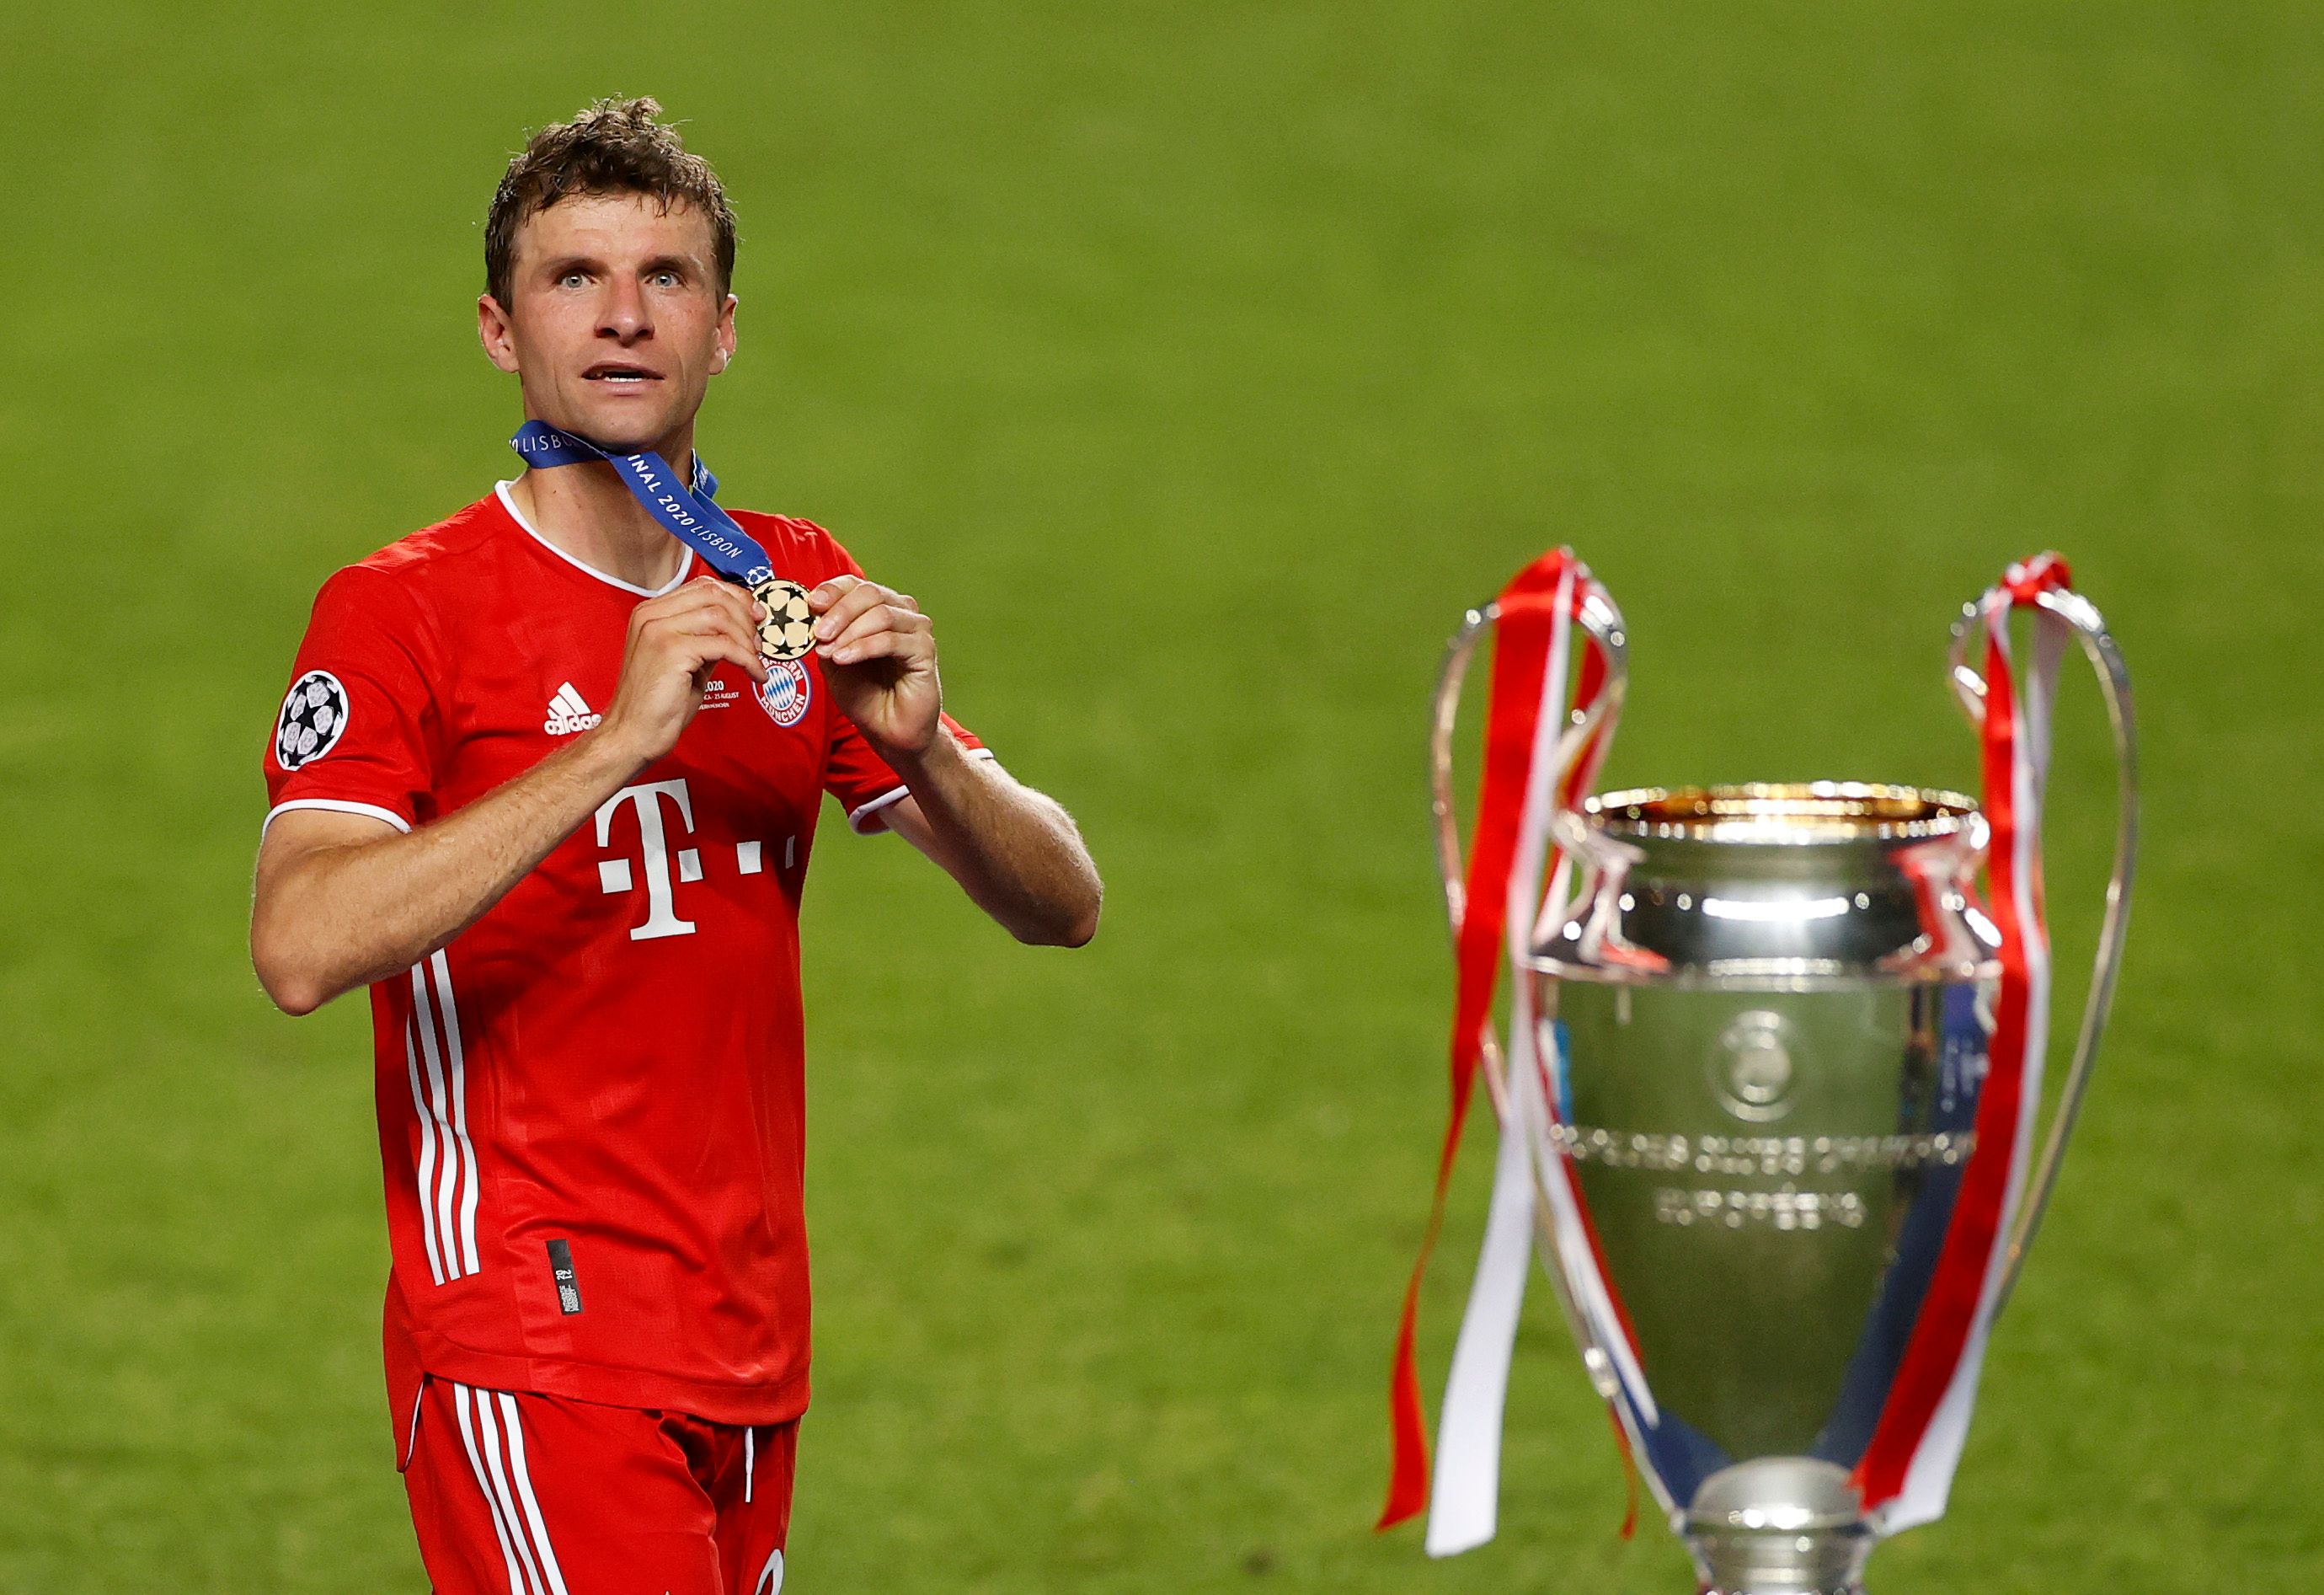 Thomas Muller of FC Bayern Munich celebrates with his winners medal following the UEFA Champions League Final match between Paris Saint-Germain and Bayern Munich at Estadio do Sport Lisboa e Benfica on August 23, 2020 in Lisbon, Portugal